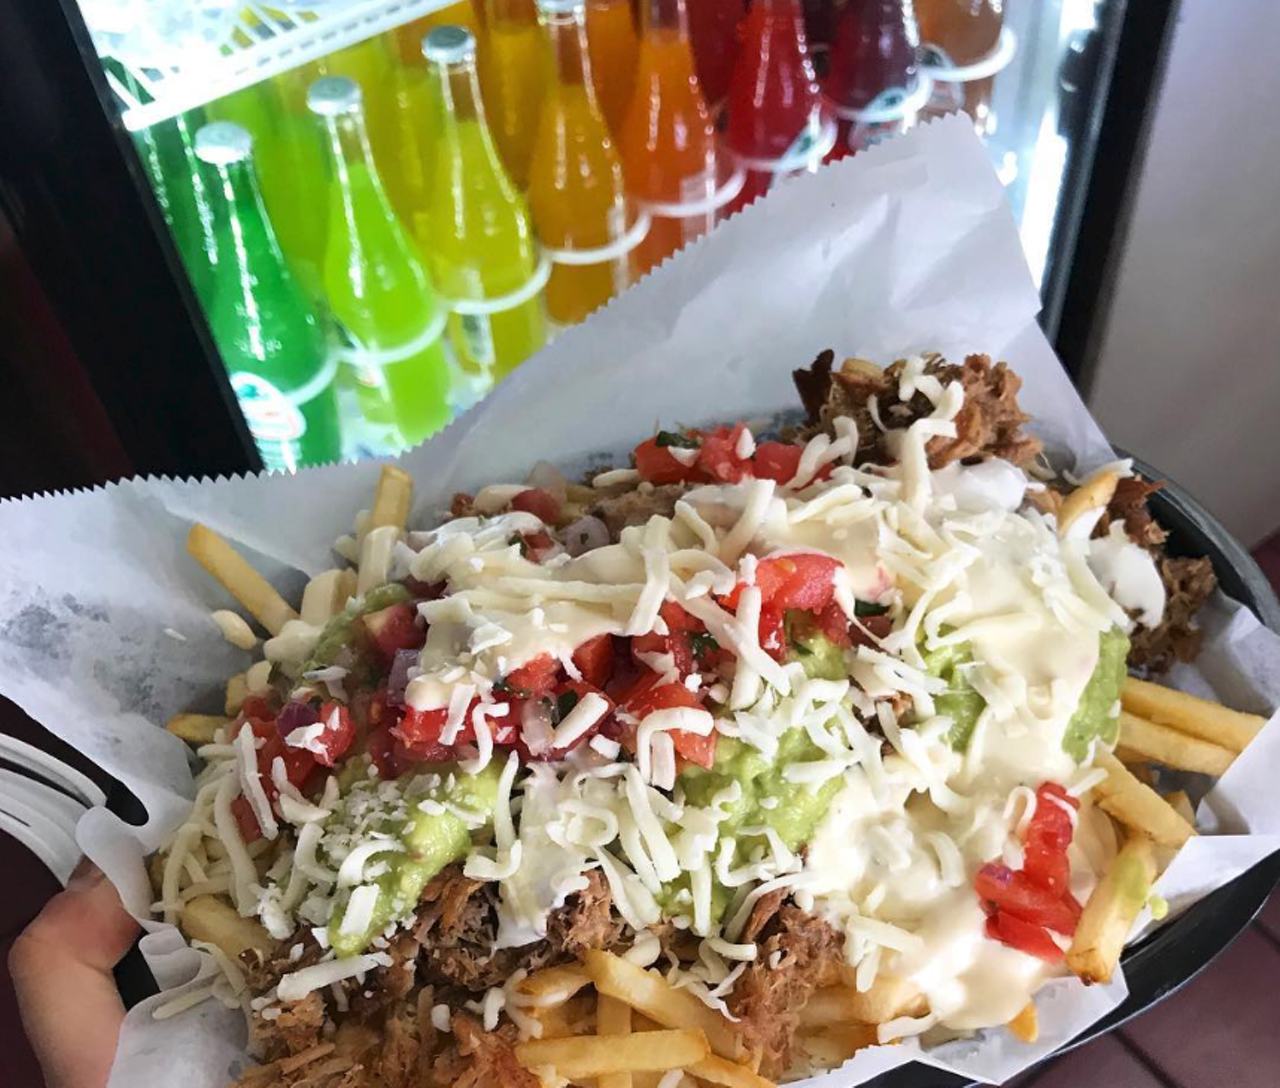 Xtreme tacos  
6809 N Nebraska Ave Suite A, Tampa, 813-570-6407
Massive burritos, tacos and other traditional Mexican street eats can be devoured at Xtreme. Don&#146;t believe us? Bring your newborn child to hold up for comparison. 
Photo via Xtreme Tacos/ Facebook